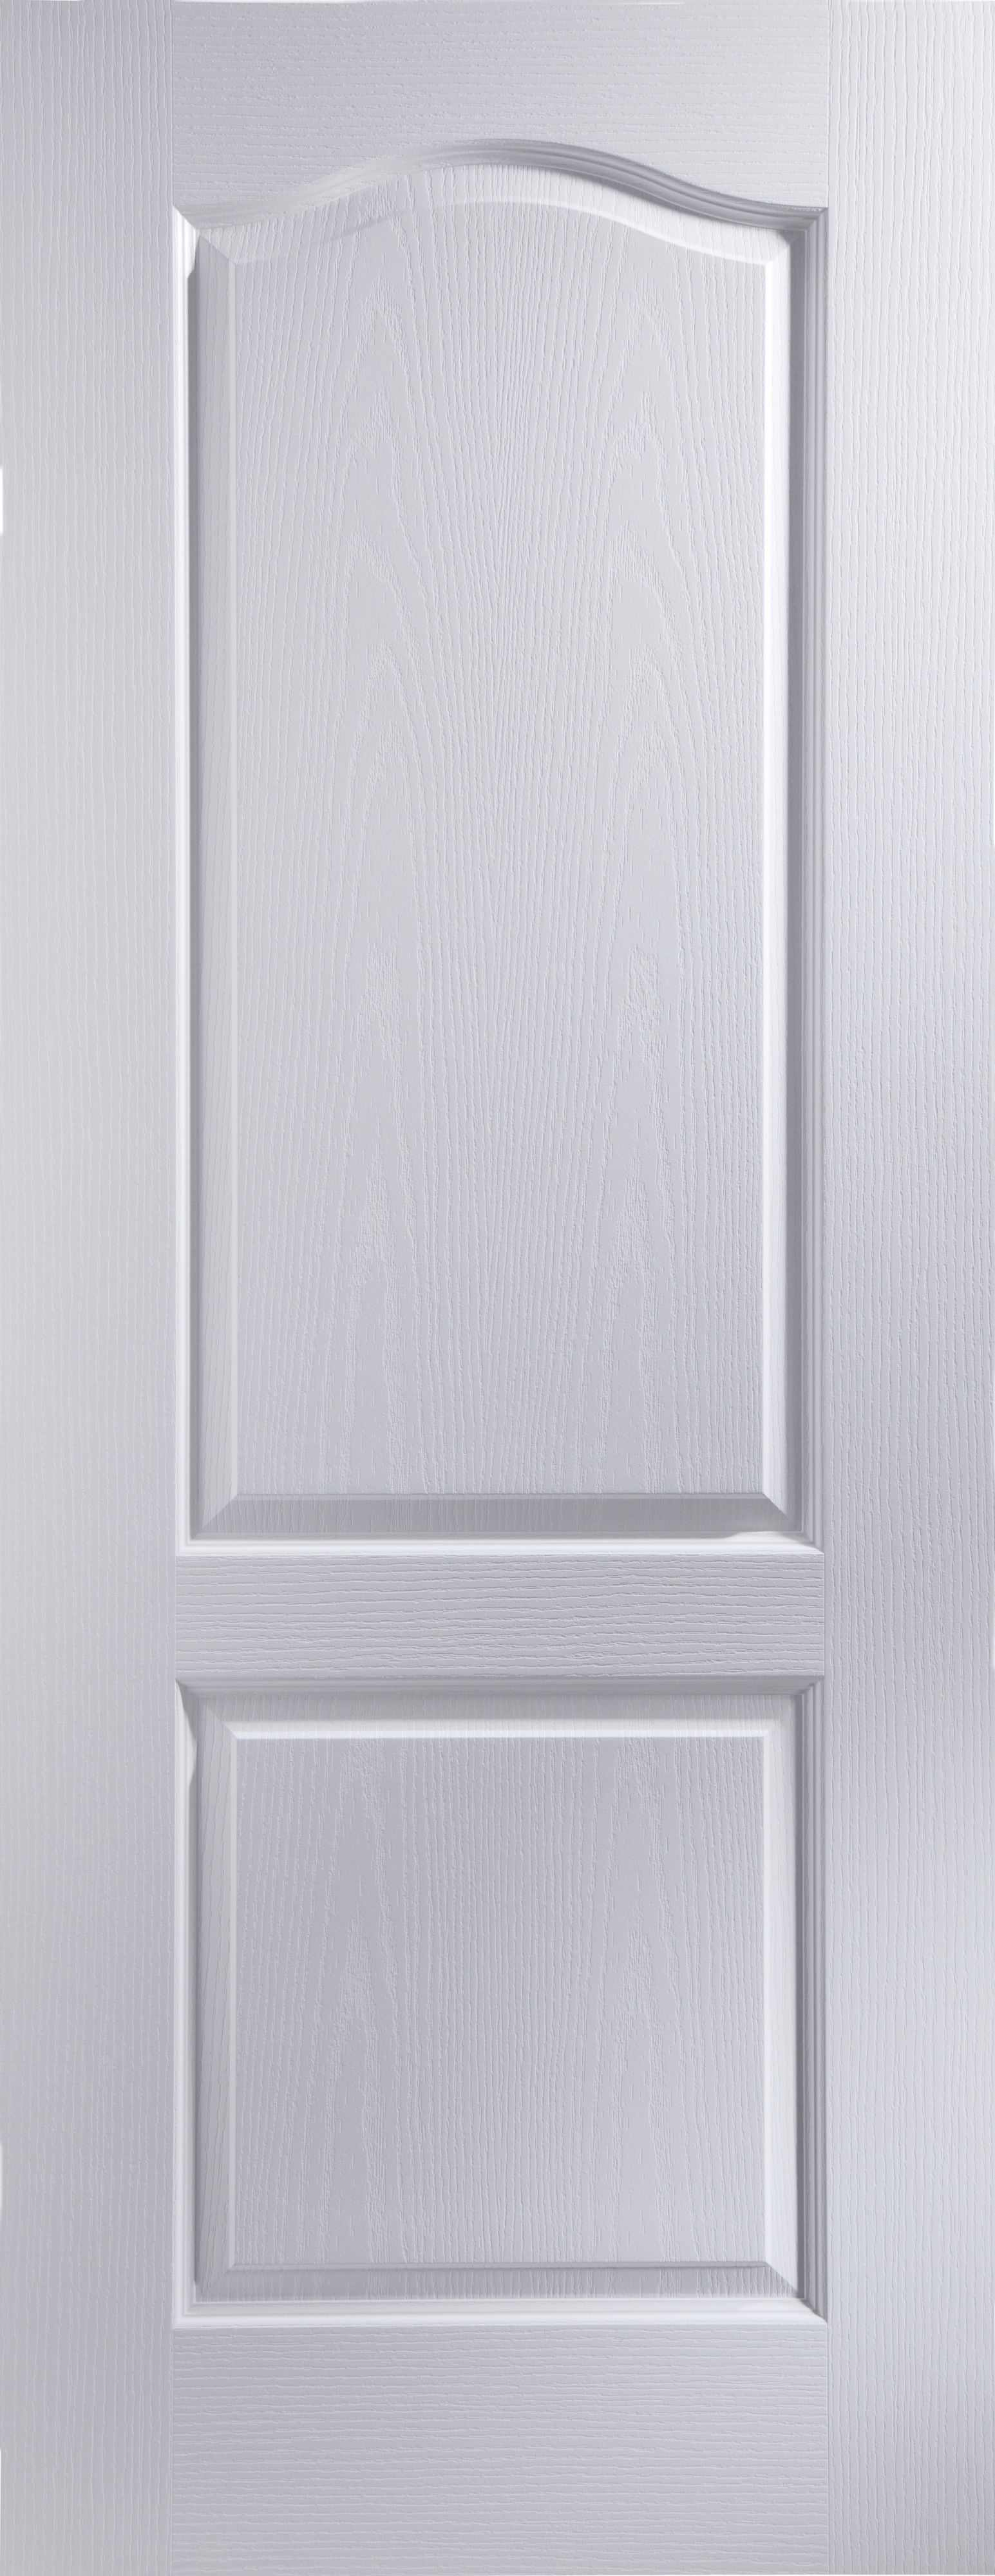 Arched 2 panel Unglazed Contemporary White Woodgrain effect Internal Door, (H)1981mm (W)762mm (T)35mm